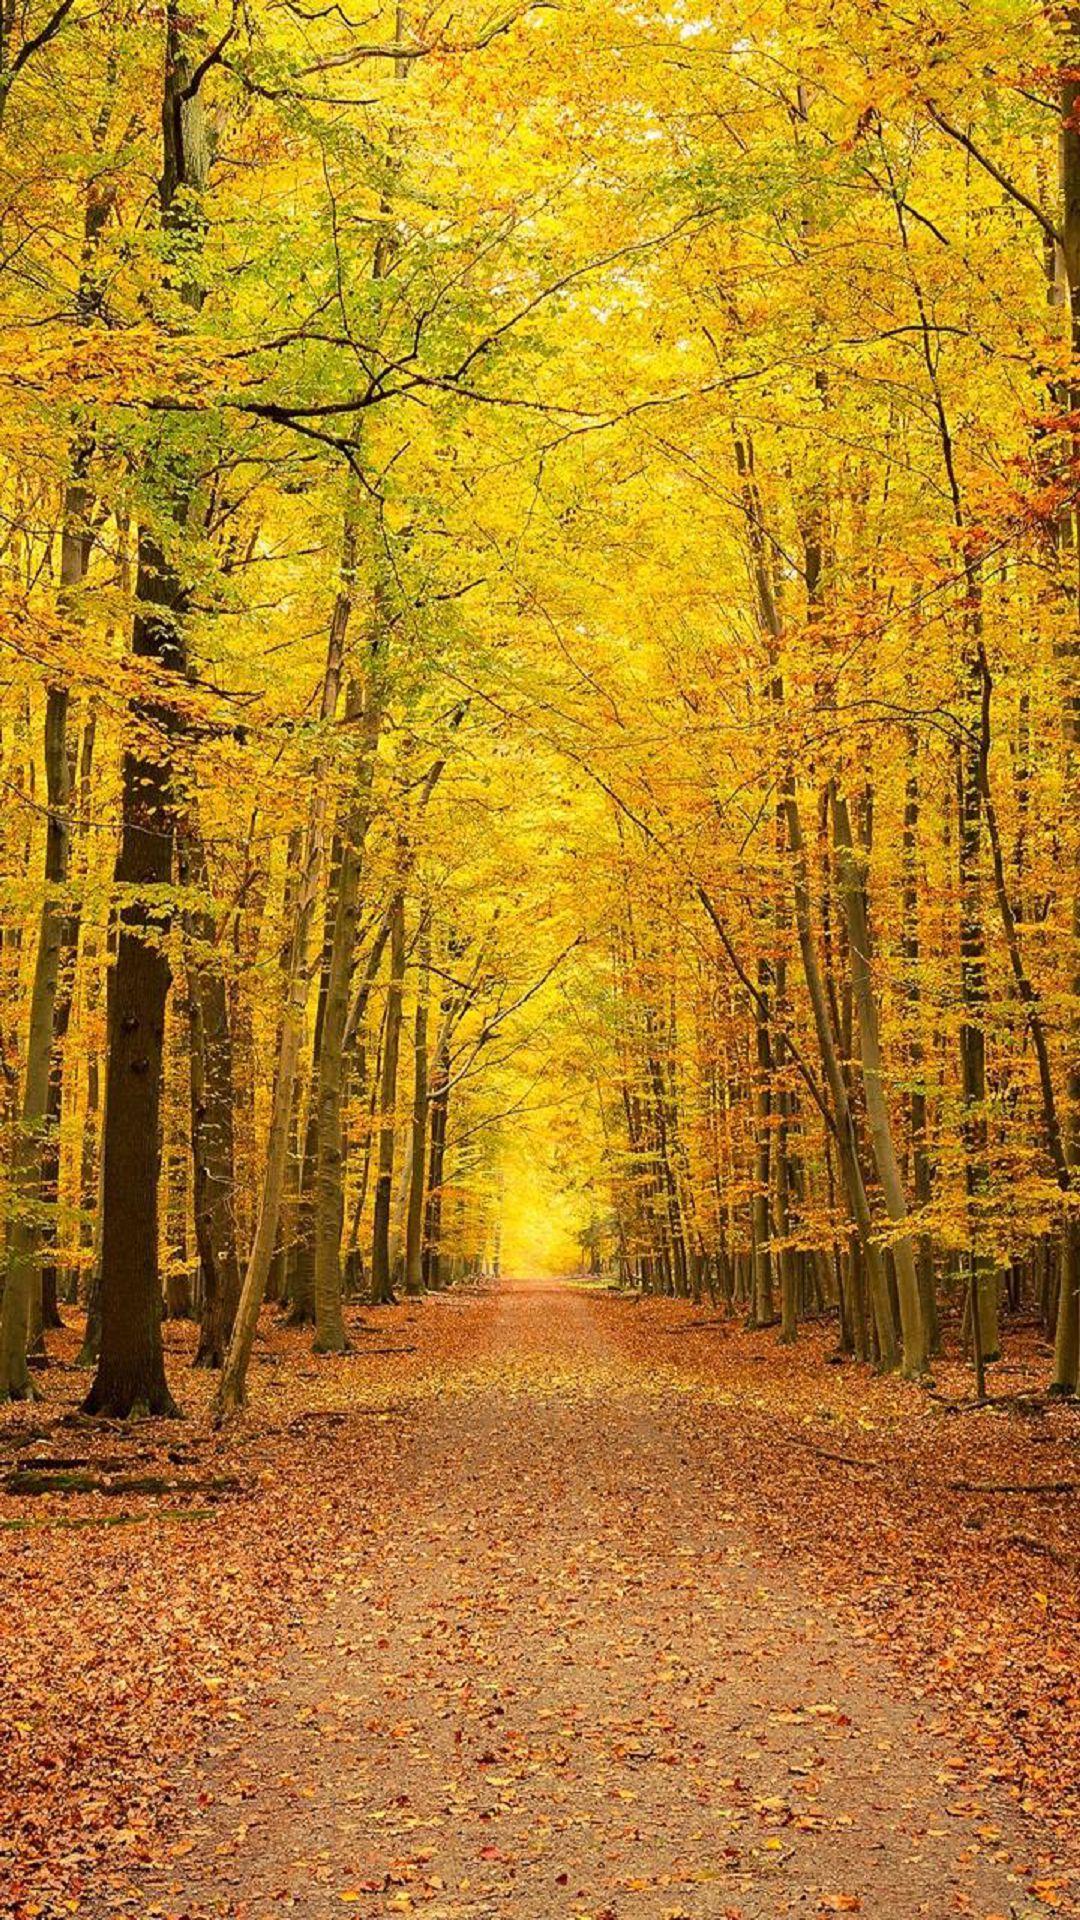 Yellow Autumn Forest Trees Android Wallpaper free download